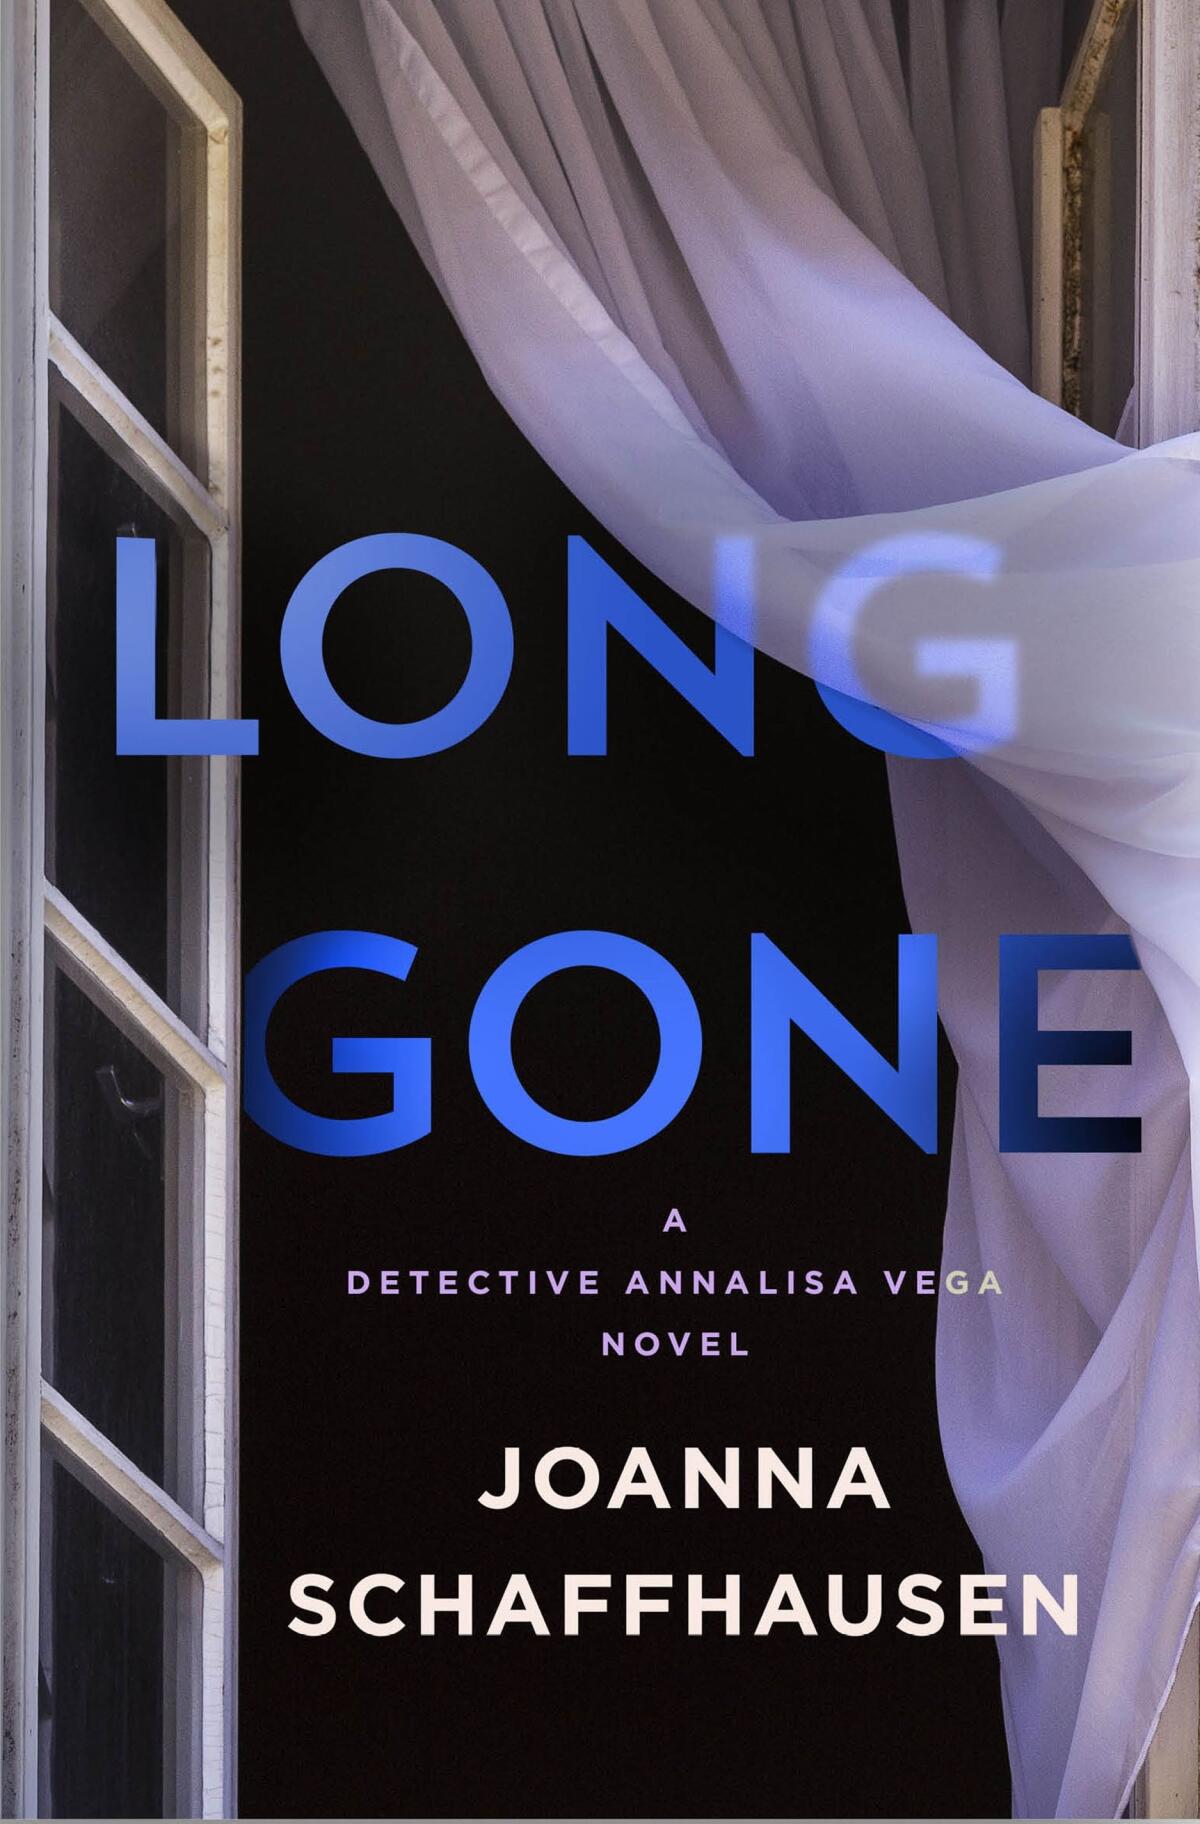 This cover image released by Minotaur shows "Long Gone" by Joanna Schaffhausen. (Minotaur via AP)